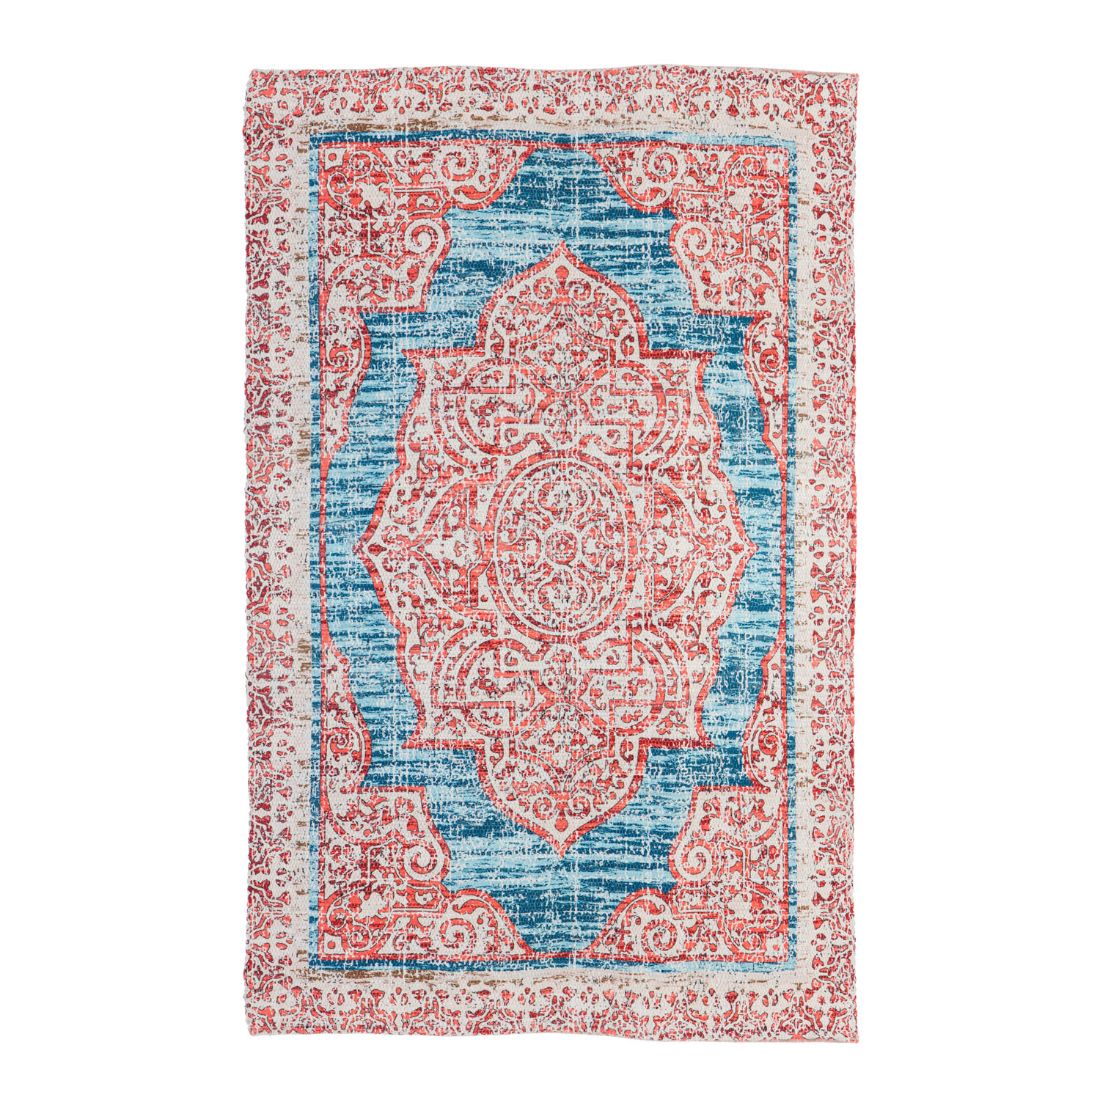 Red with Turquoise Digitally-Printed Indoor/Outdoor Rug, 4'x6'